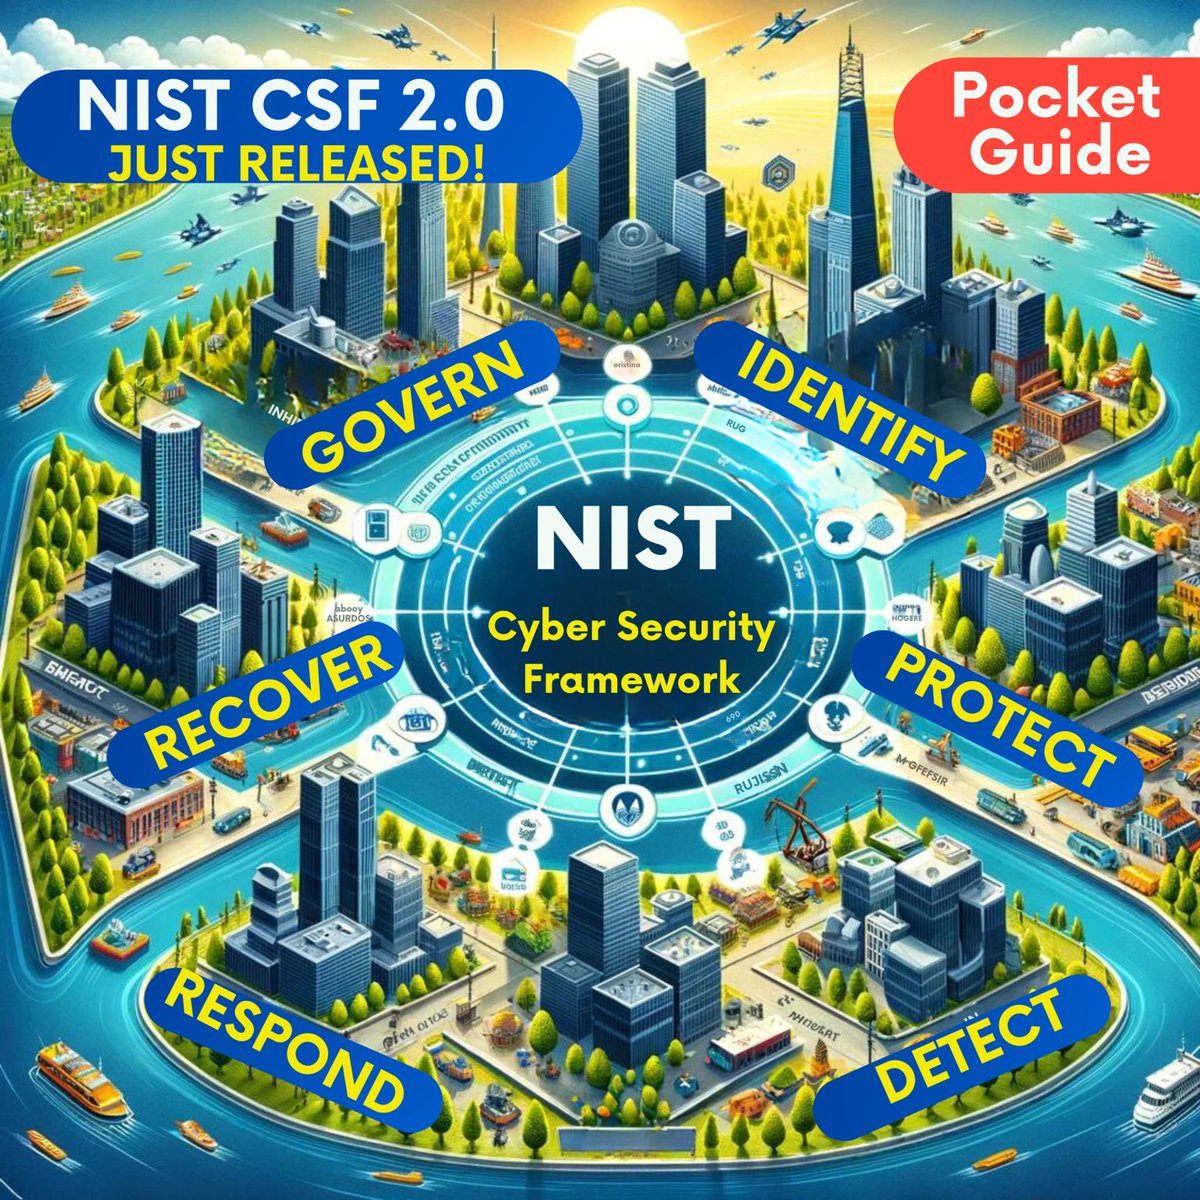 The NIST CSF 2.0 (Cyber Security Framework) Just Dropped Recently.  Outline is Below. Looking for a Career in GRC or just want to Keep your Business Secure? Here's the Framework:

There are now 6 categories for the NIST CSF 2.0. If you take the time to review this framework, you